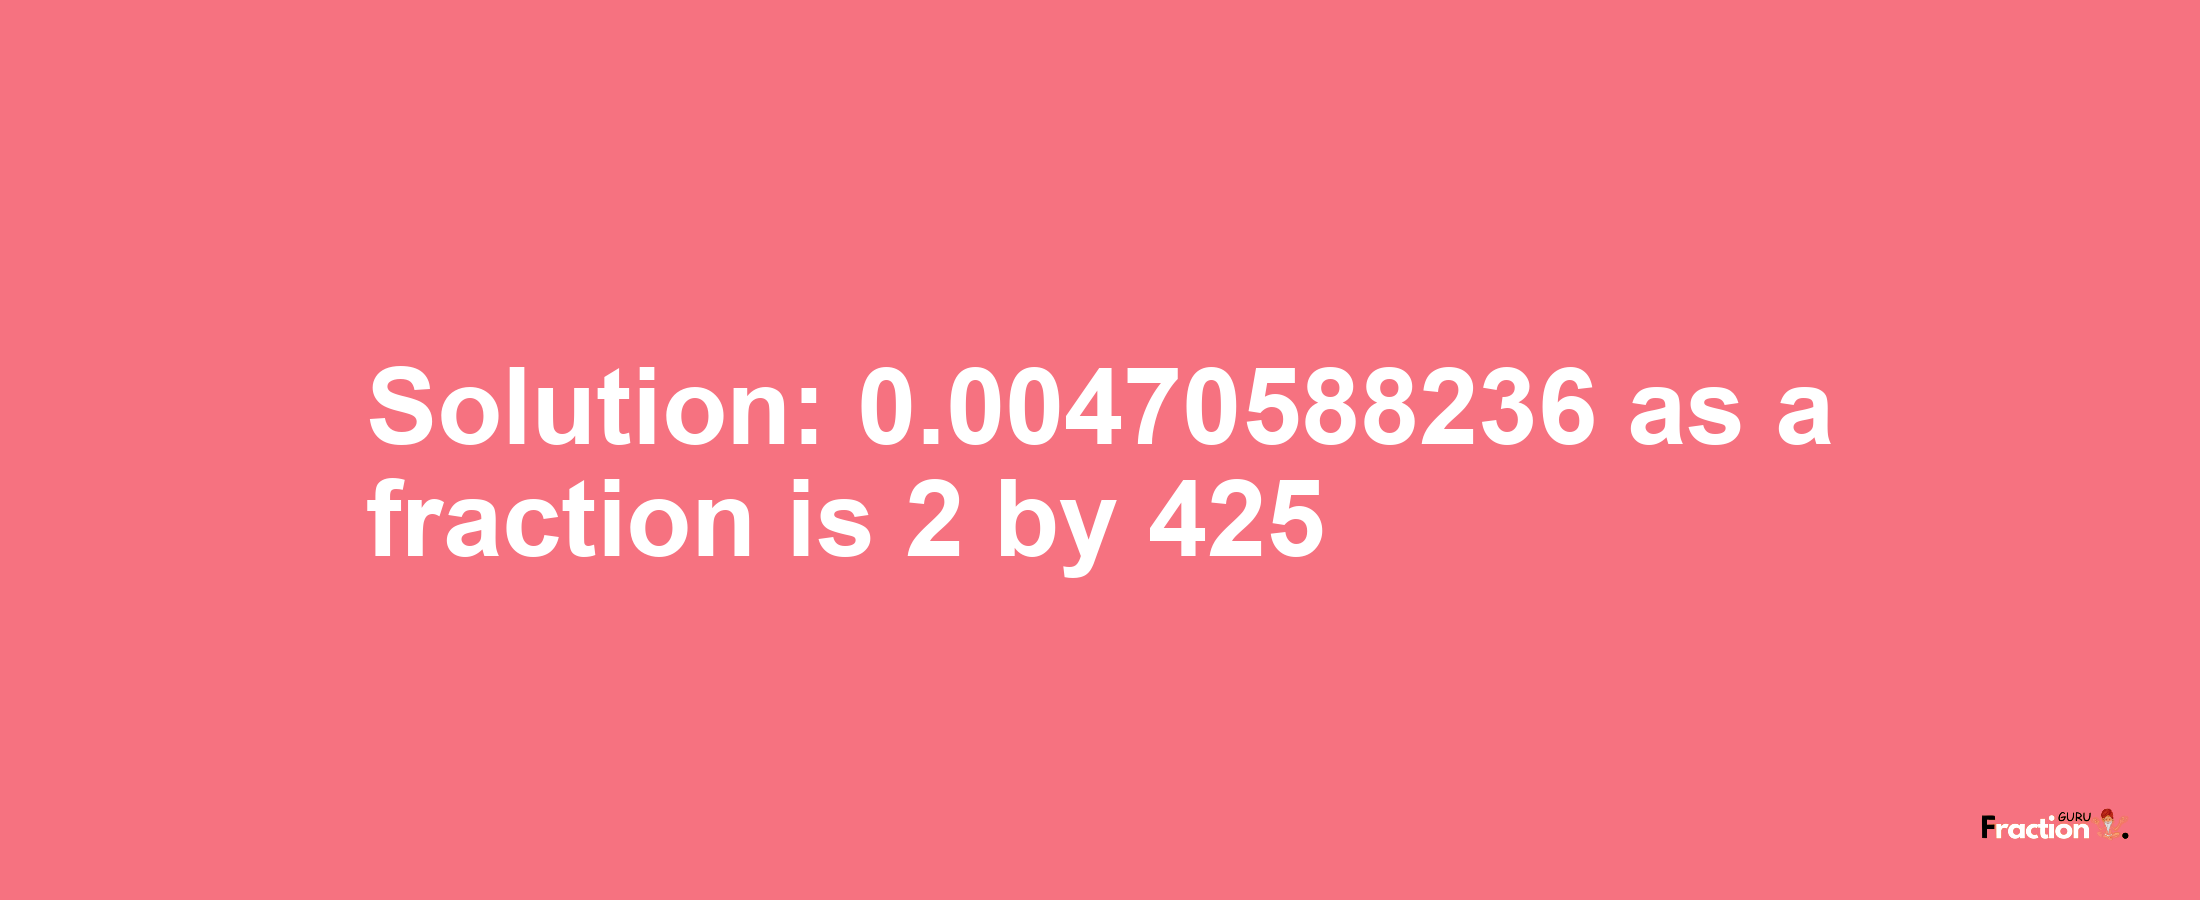 Solution:0.00470588236 as a fraction is 2/425